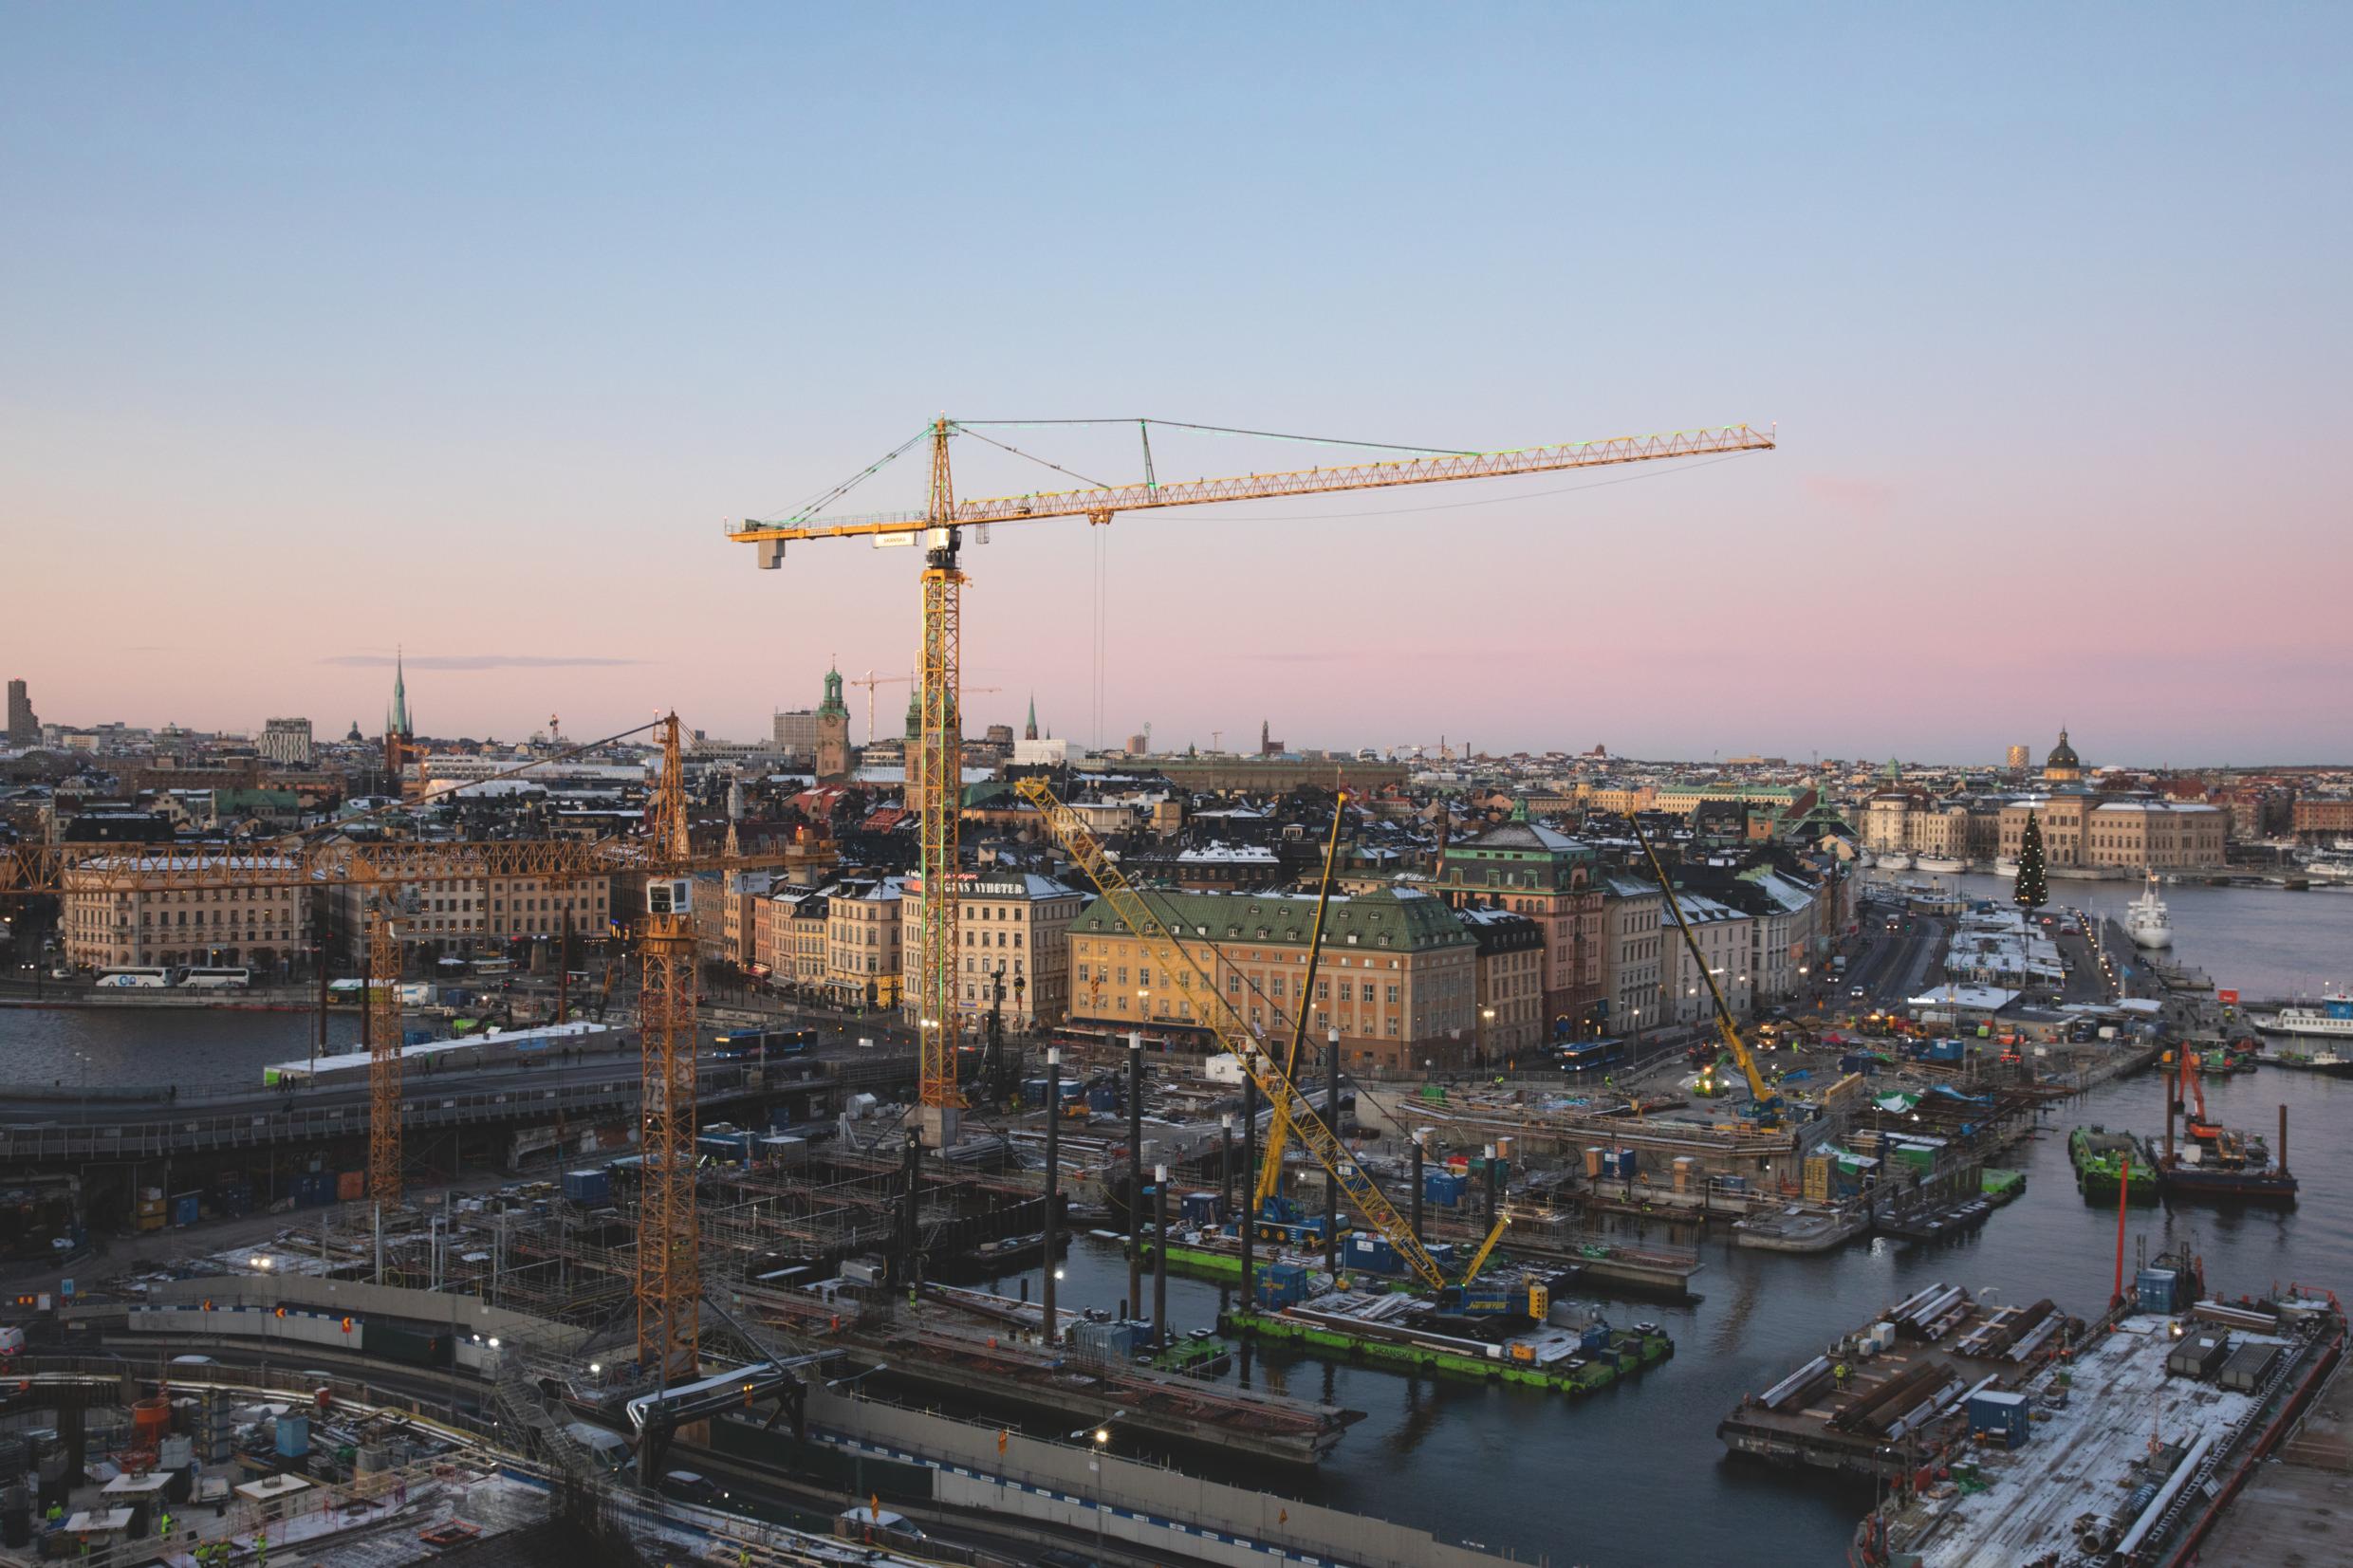 Stockholm view by night, overlooking the construction site at Slussen.